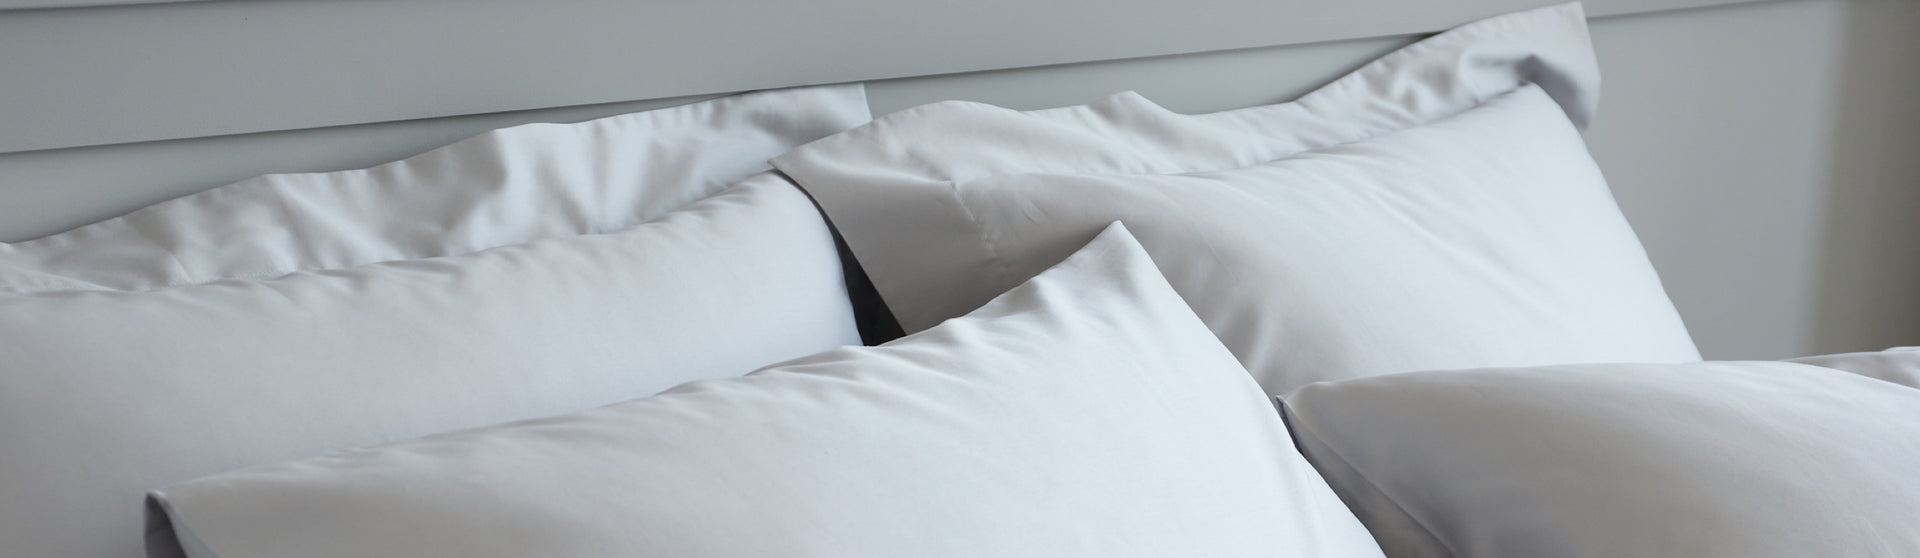 Our simple guide to the complex world of bedding